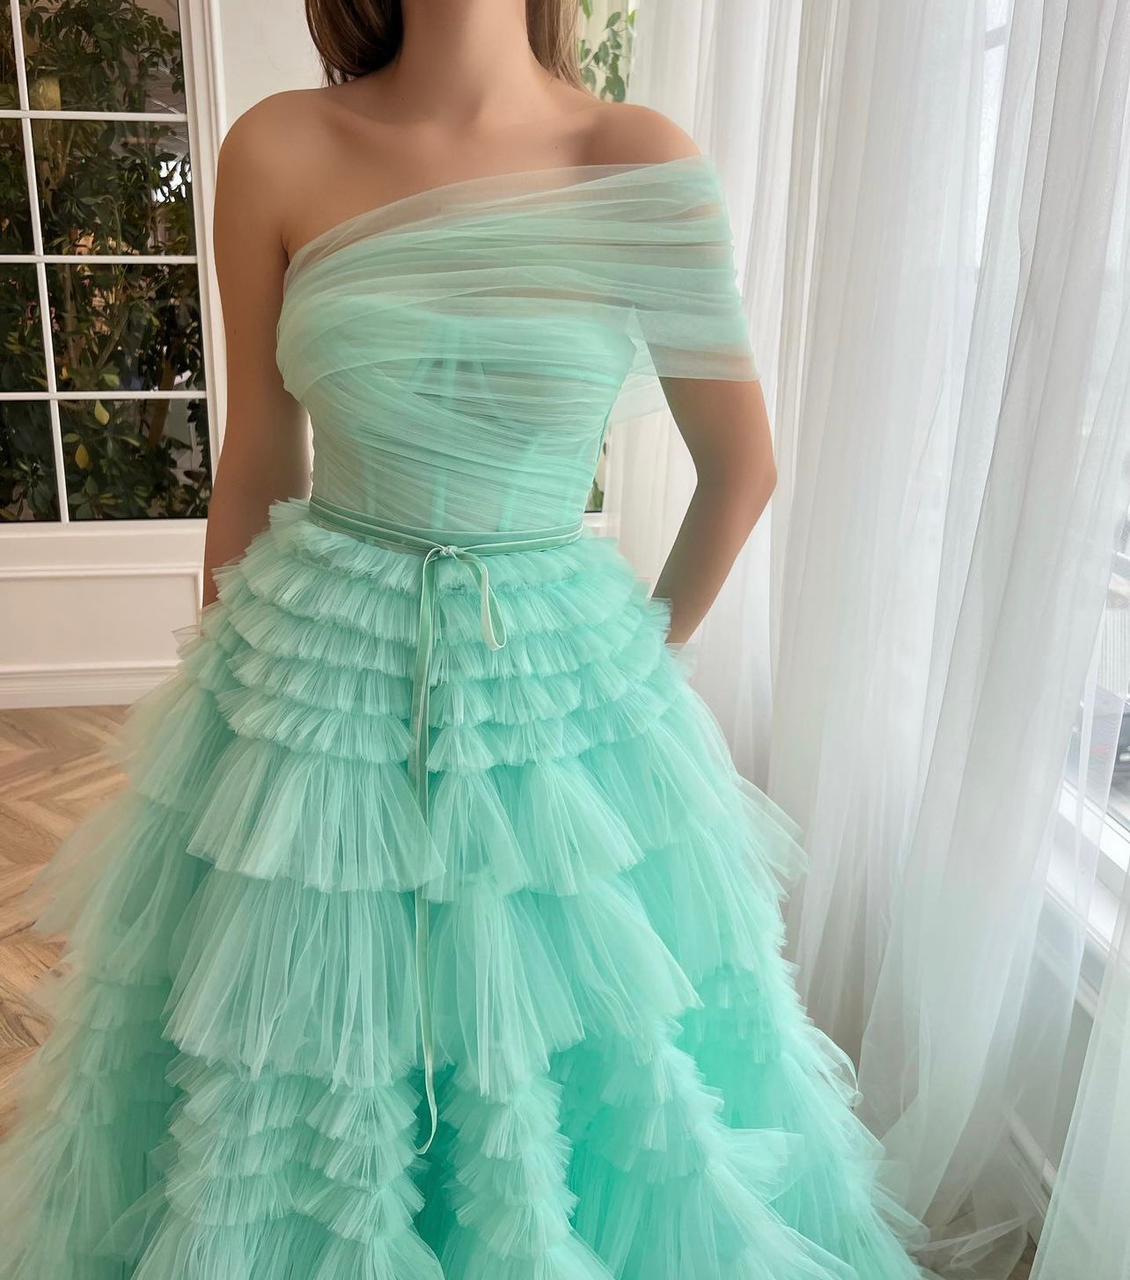 Turquoise A-Line dress with one shoulder sleeve and ruffles